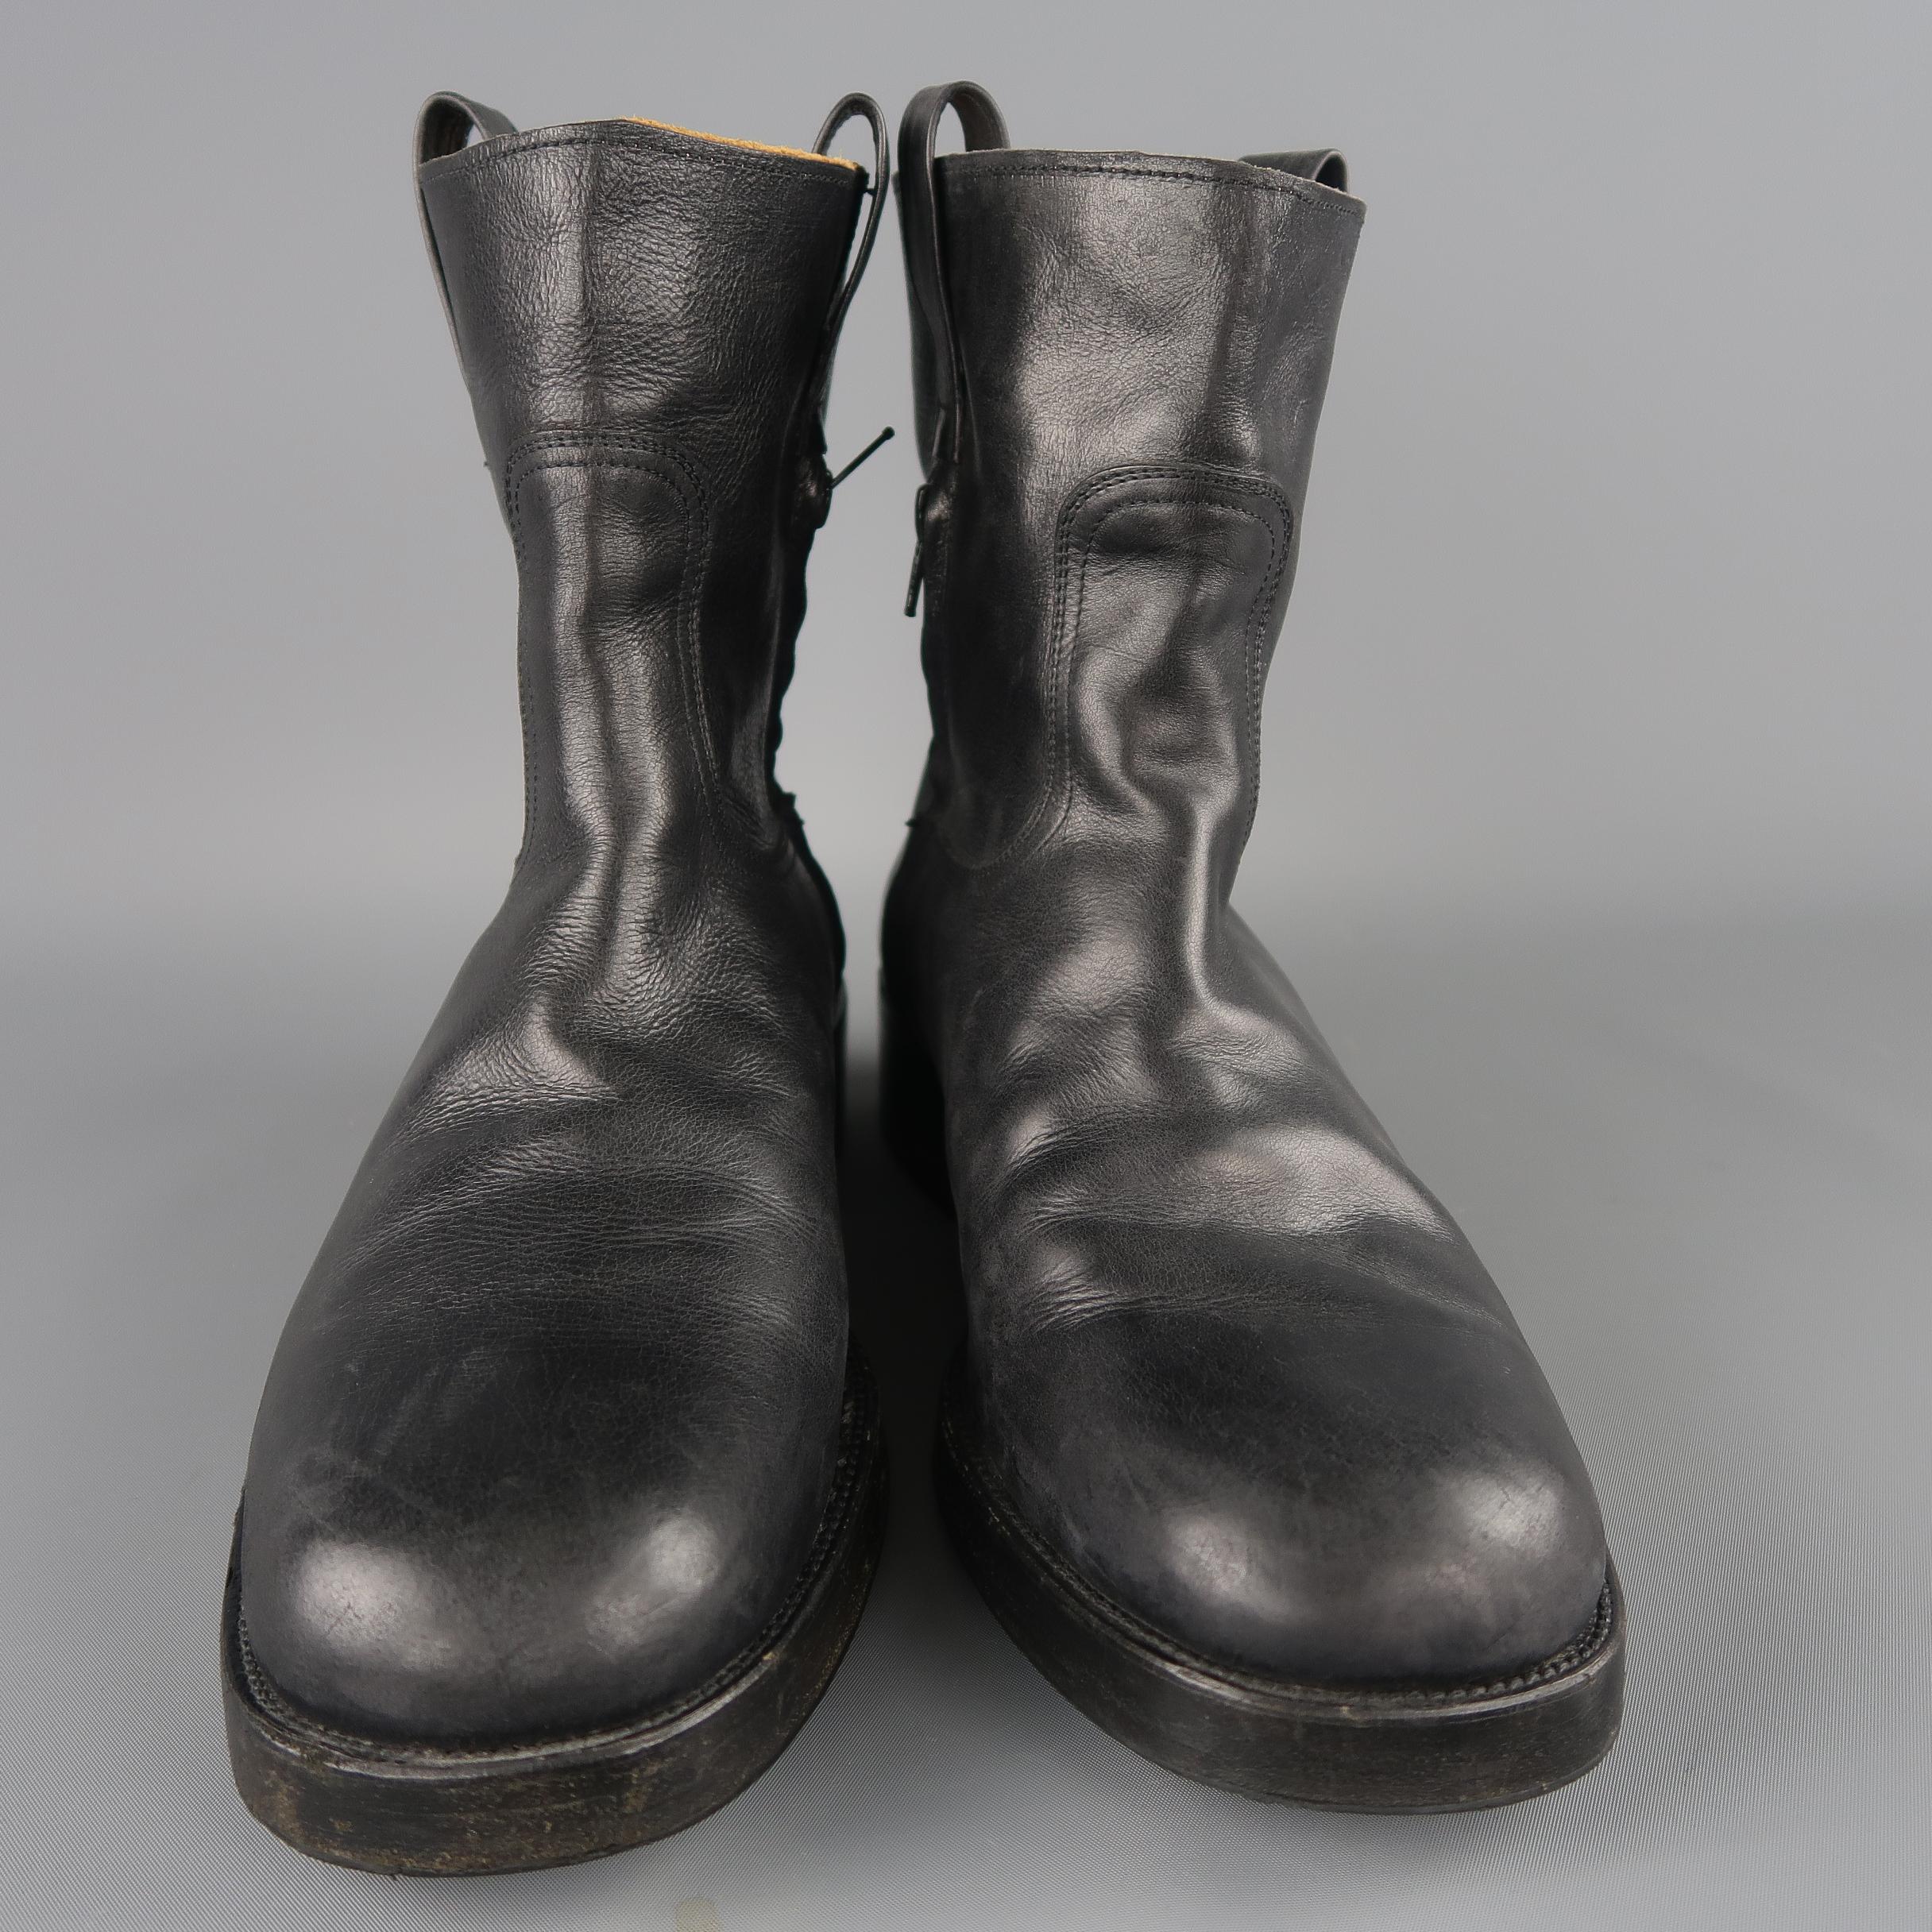 Maison Martin Margiela  pull on biker style boots come in black leather with a rounded square toe, thick chunky heeled sole, and internal half zip. Made in Italy.
 
Good Pre-Owned Condition.
Marked:IT 44
 
Measurements:
 
Length: 7.5 in.